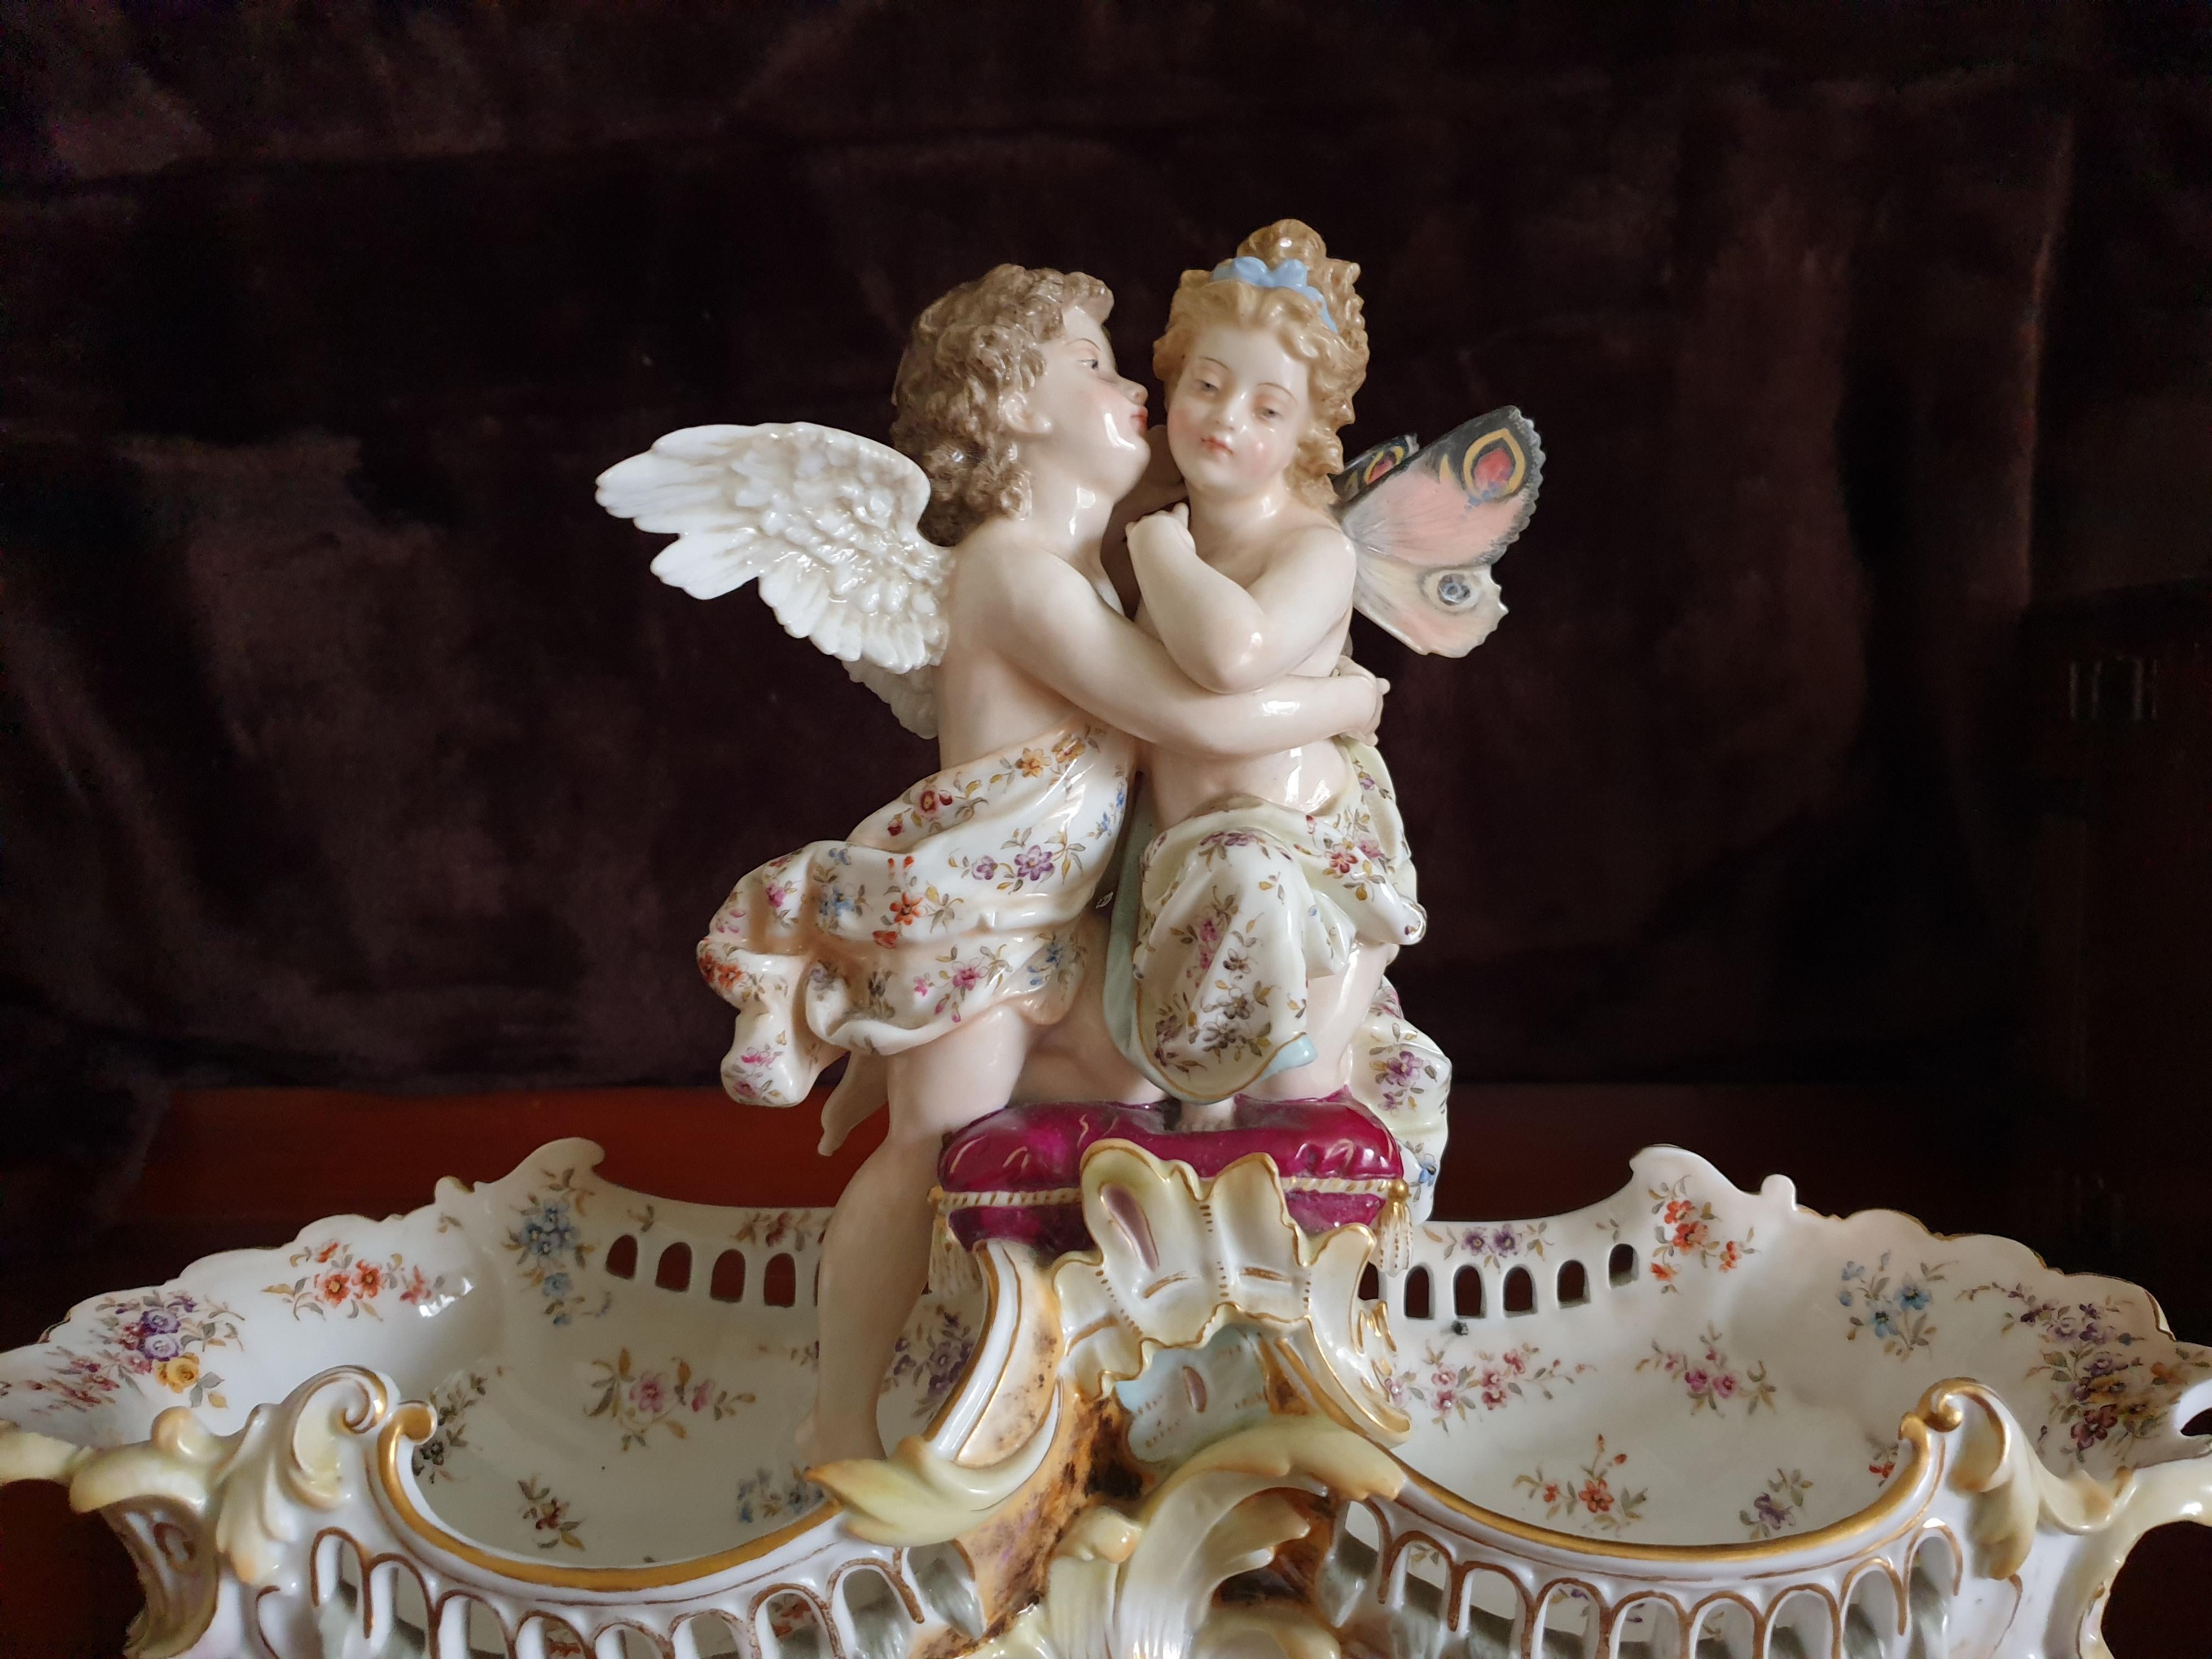 Impressive German reticulated centrepiece scene illustrates a pair of cherub lovers with finely crafted hand painted angel wings and butterfly wings, with shell panels and baskets. Hand painted in perfect condition in the manner of Meissen porcelain